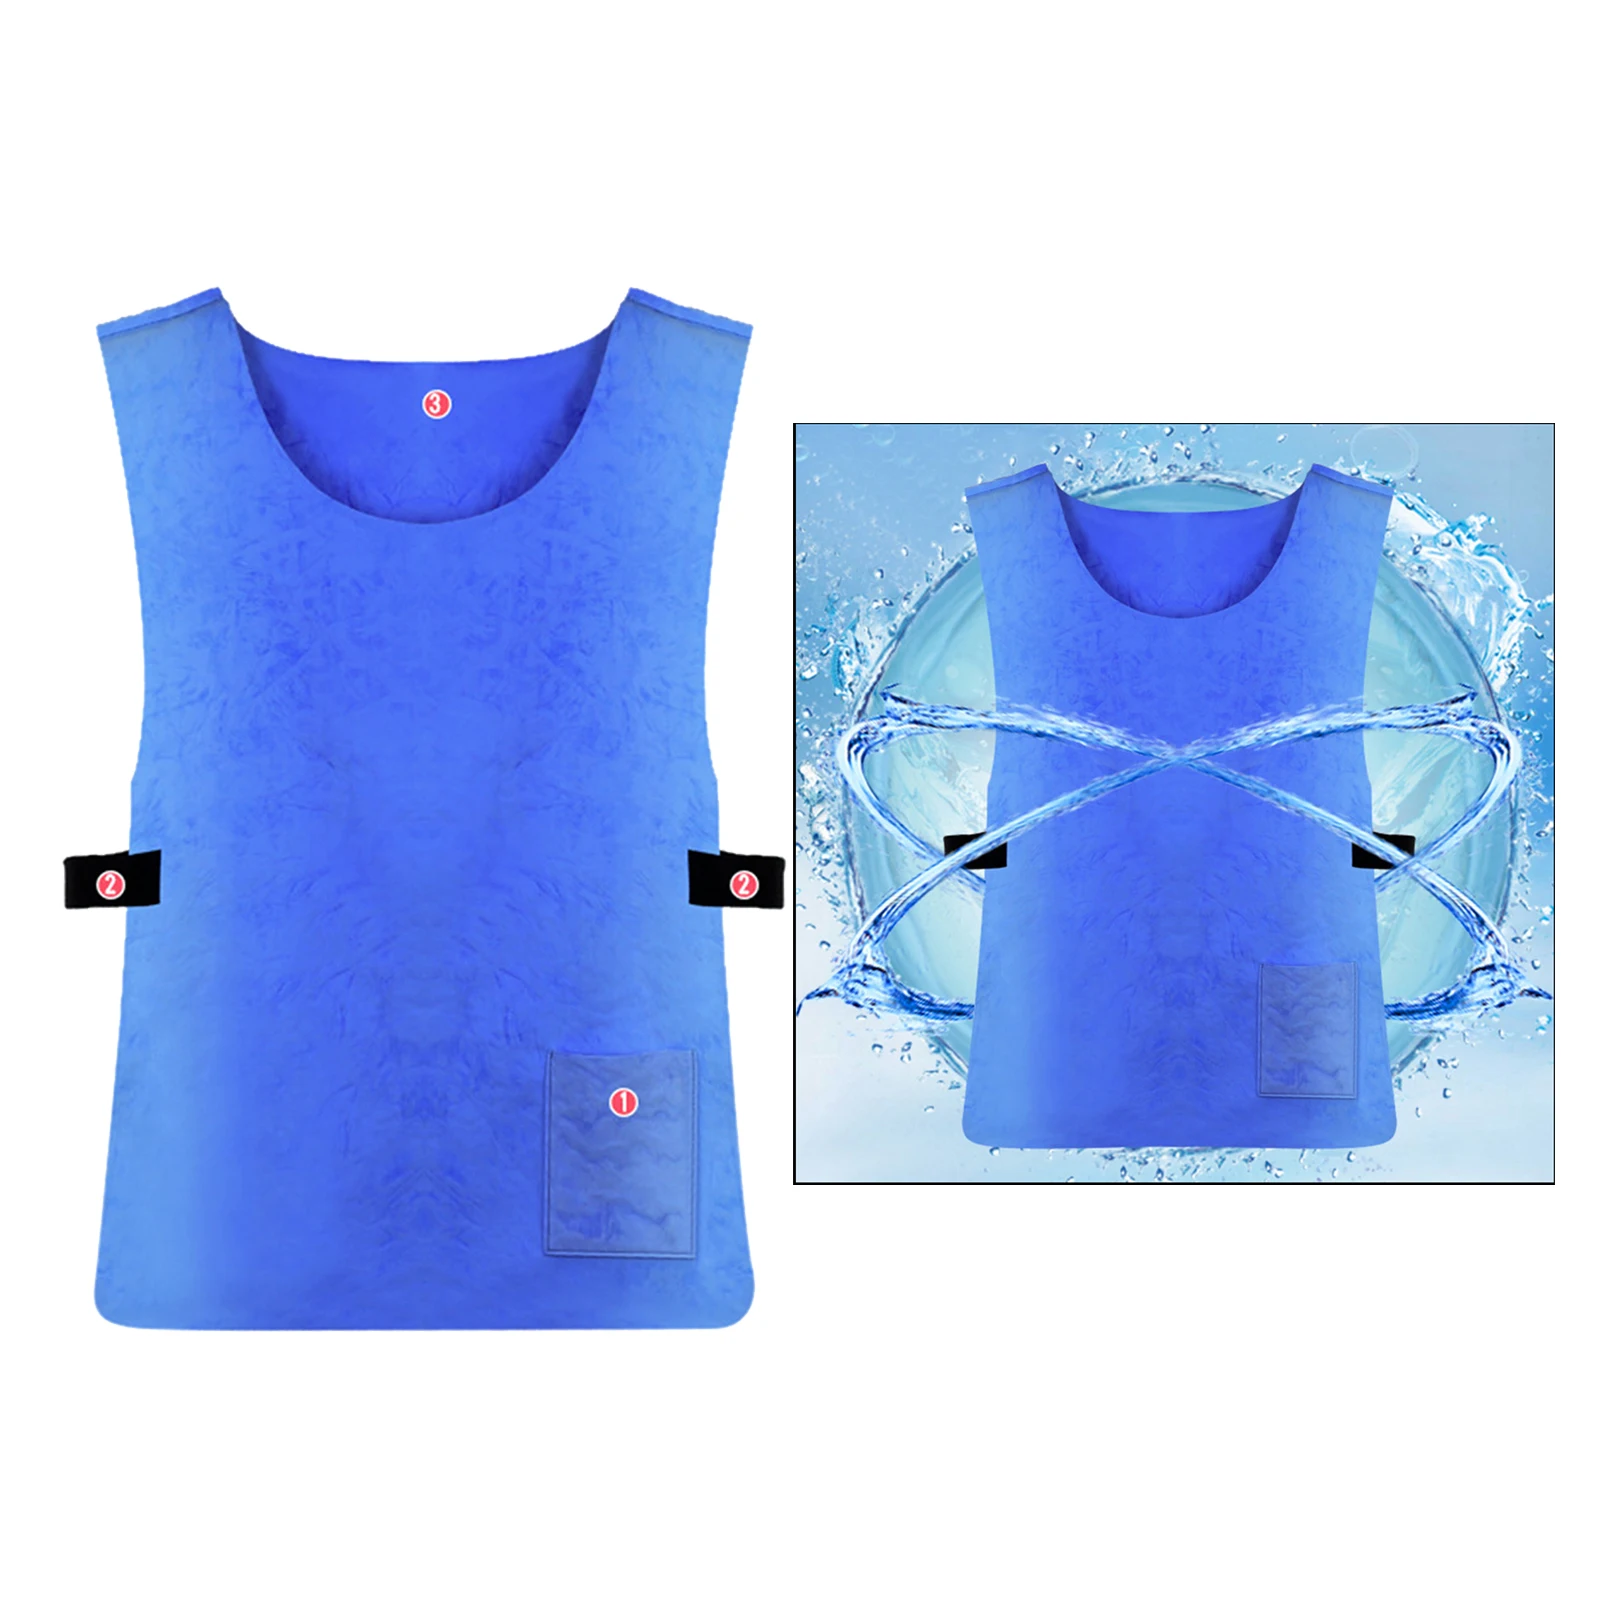 Summer Fast Cool Shirt Ice Vest Cooling Clothing Protect Heatstroke Vest